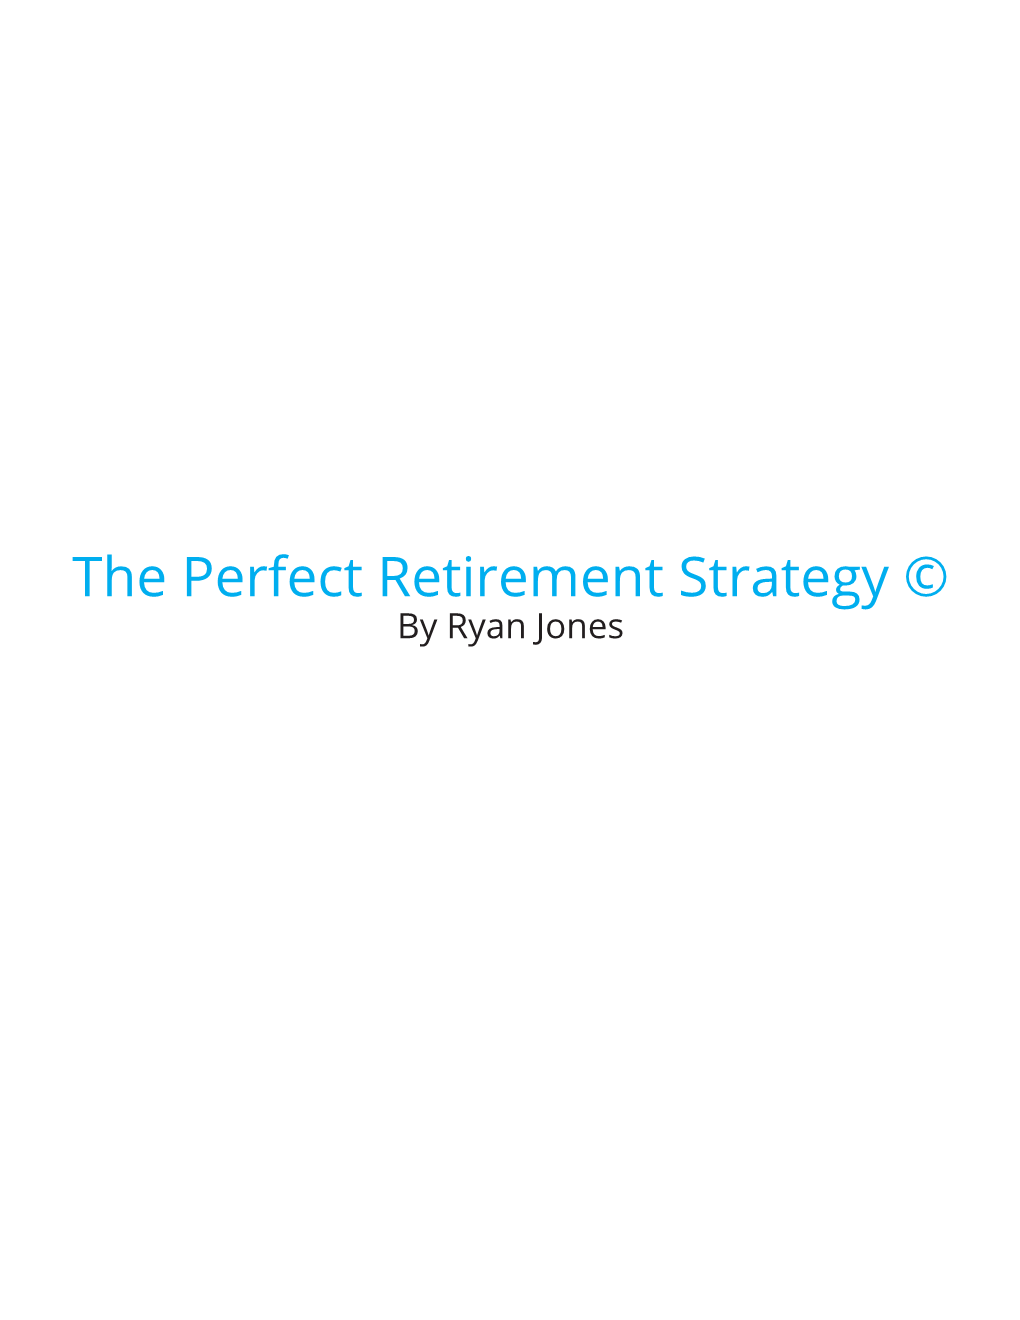 The Perfect Retirement Strategy © by Ryan Jones Table of Contents